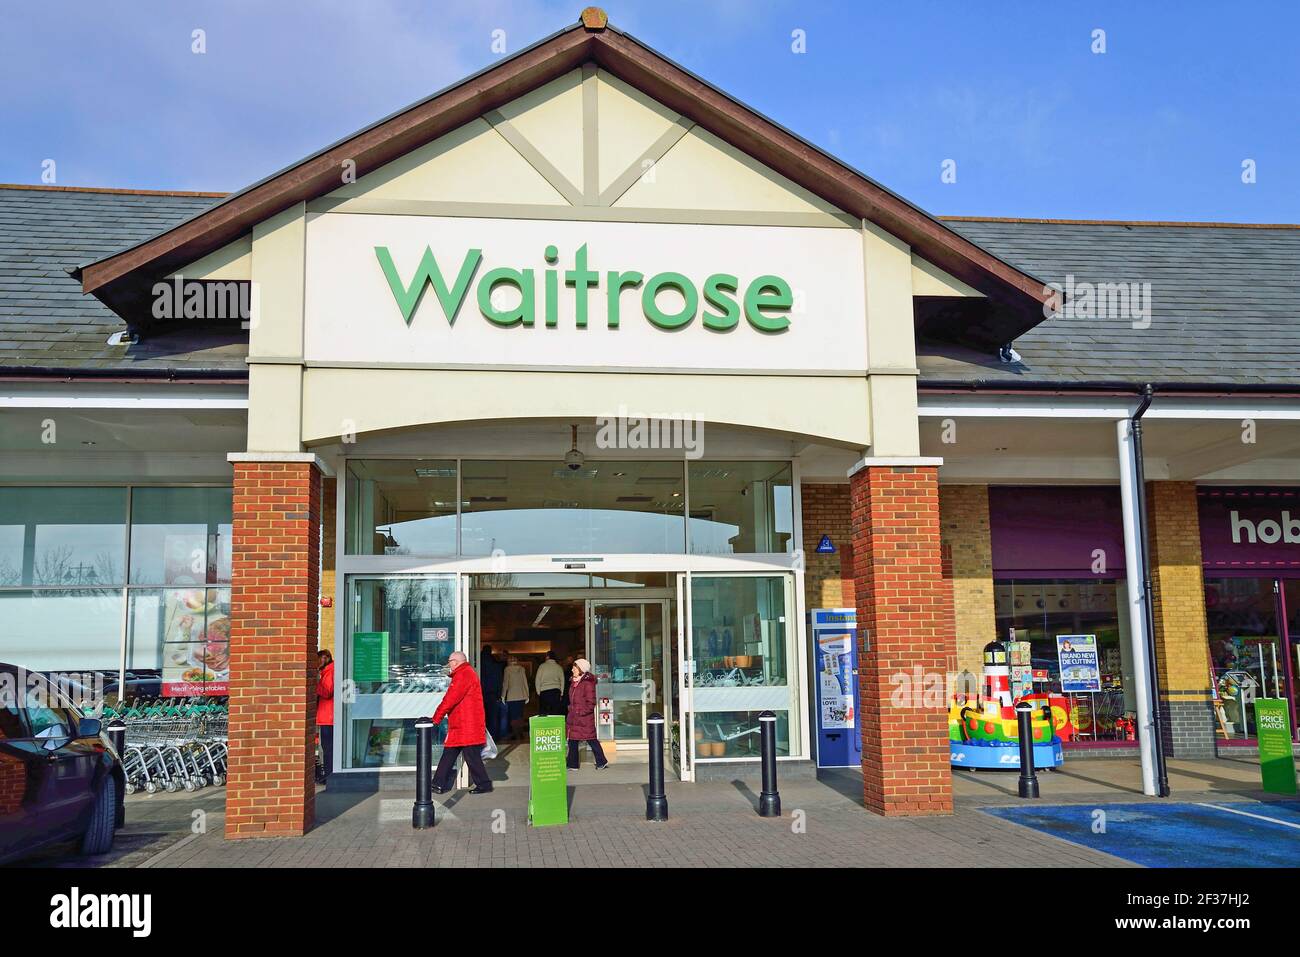 Waitrose supermarket in Two Rivers Shopping Centre (closed down), Staines-upon-Thames, Surrey, England, United Kingdom Stock Photo